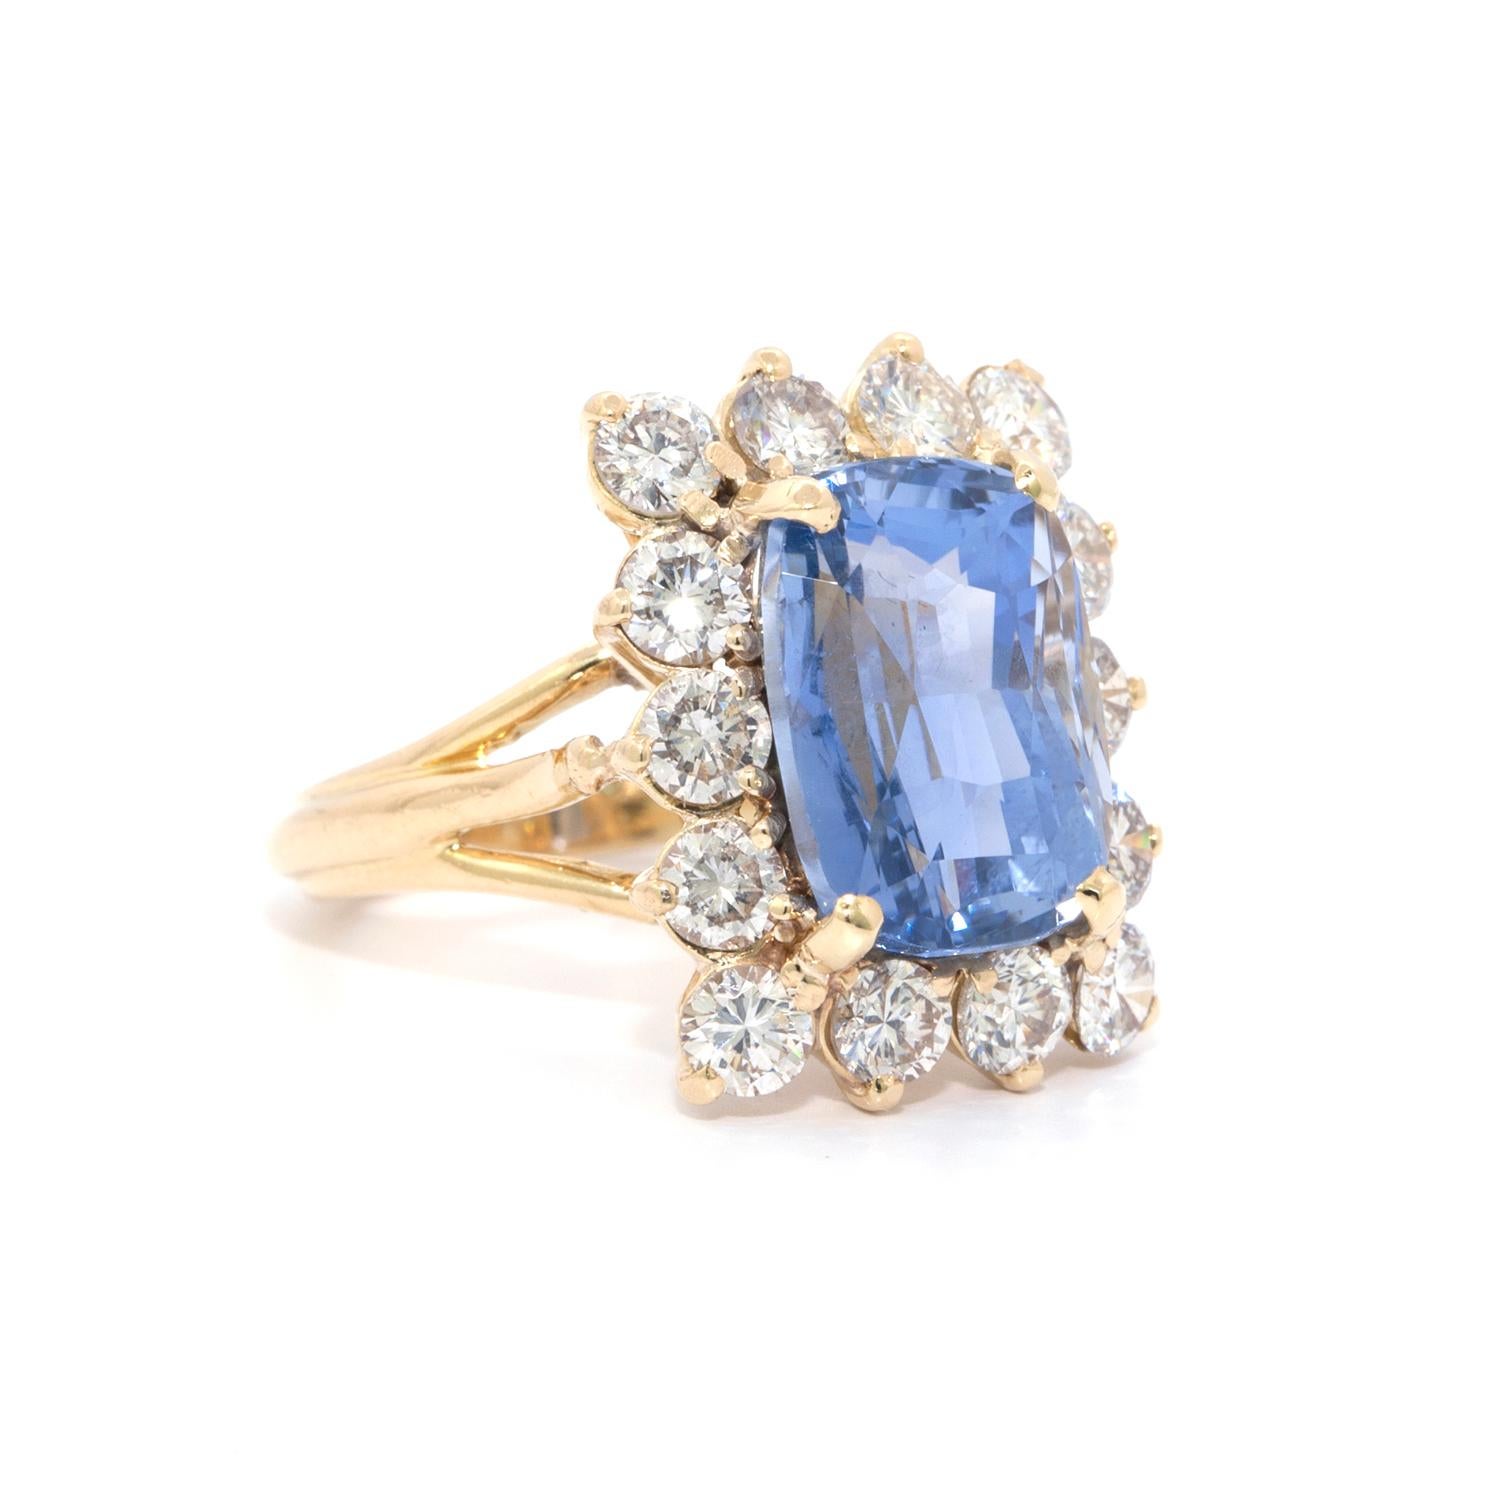 This rare unheated Ceylon Sapphire and Diamond 18k yellow gold cocktail ring that features a 8.70 cts cushion shaped Unheated Ceylon Sapphire which is surrounded by 14 rbc white diamonds that weigh in total 2.10 carats.   Size 4.  6 grams           